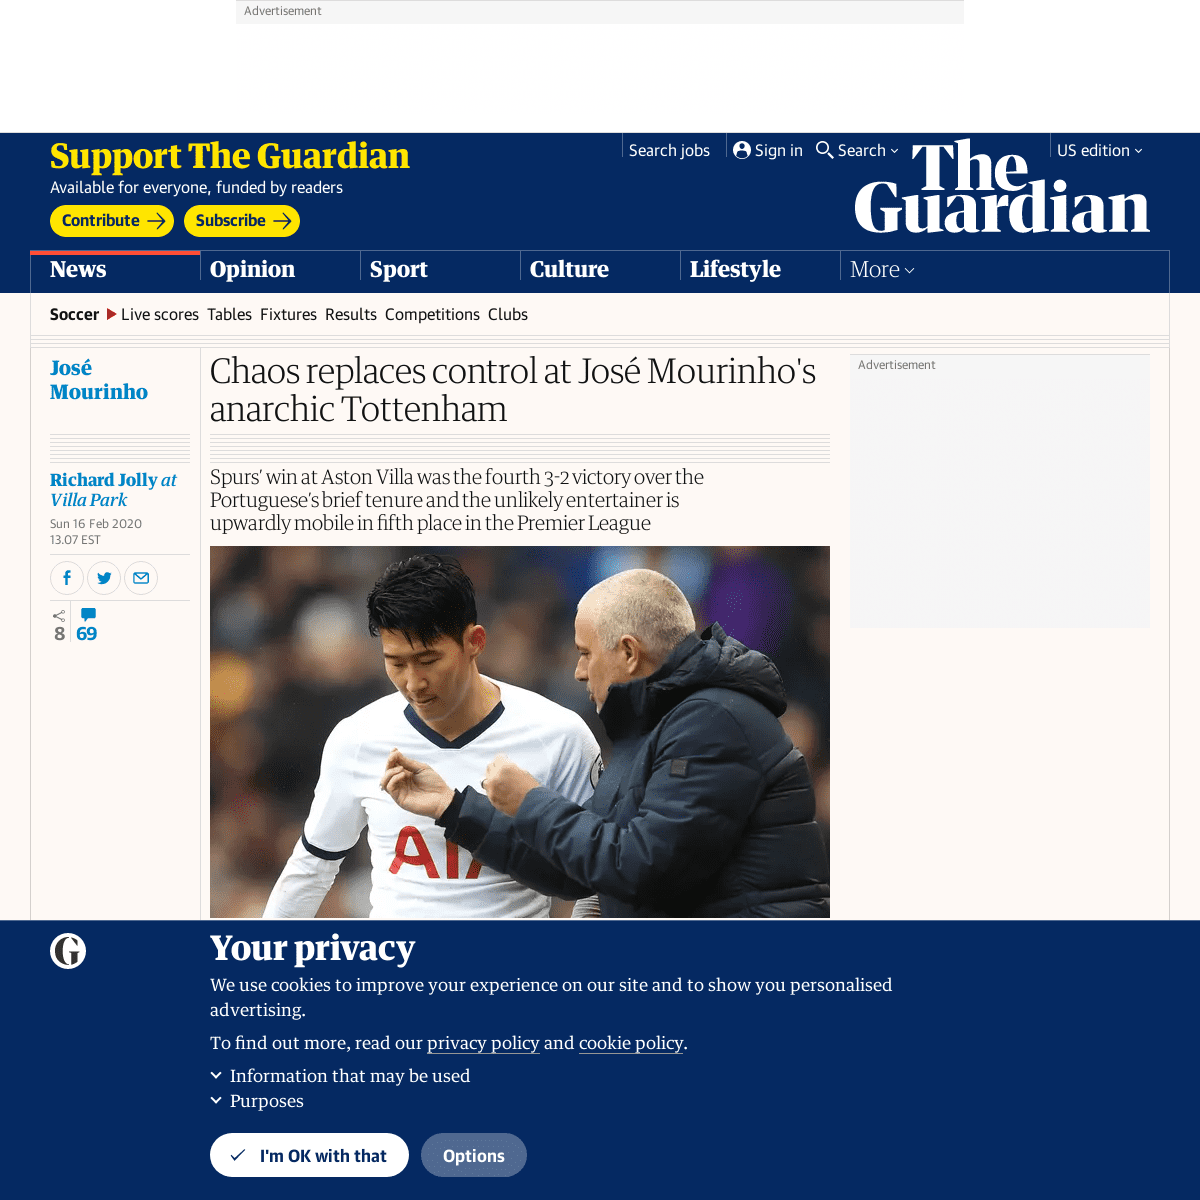 A complete backup of www.theguardian.com/football/2020/feb/16/chaos-replaces-control-at-jose-mourinhos-anarchic-tottenham